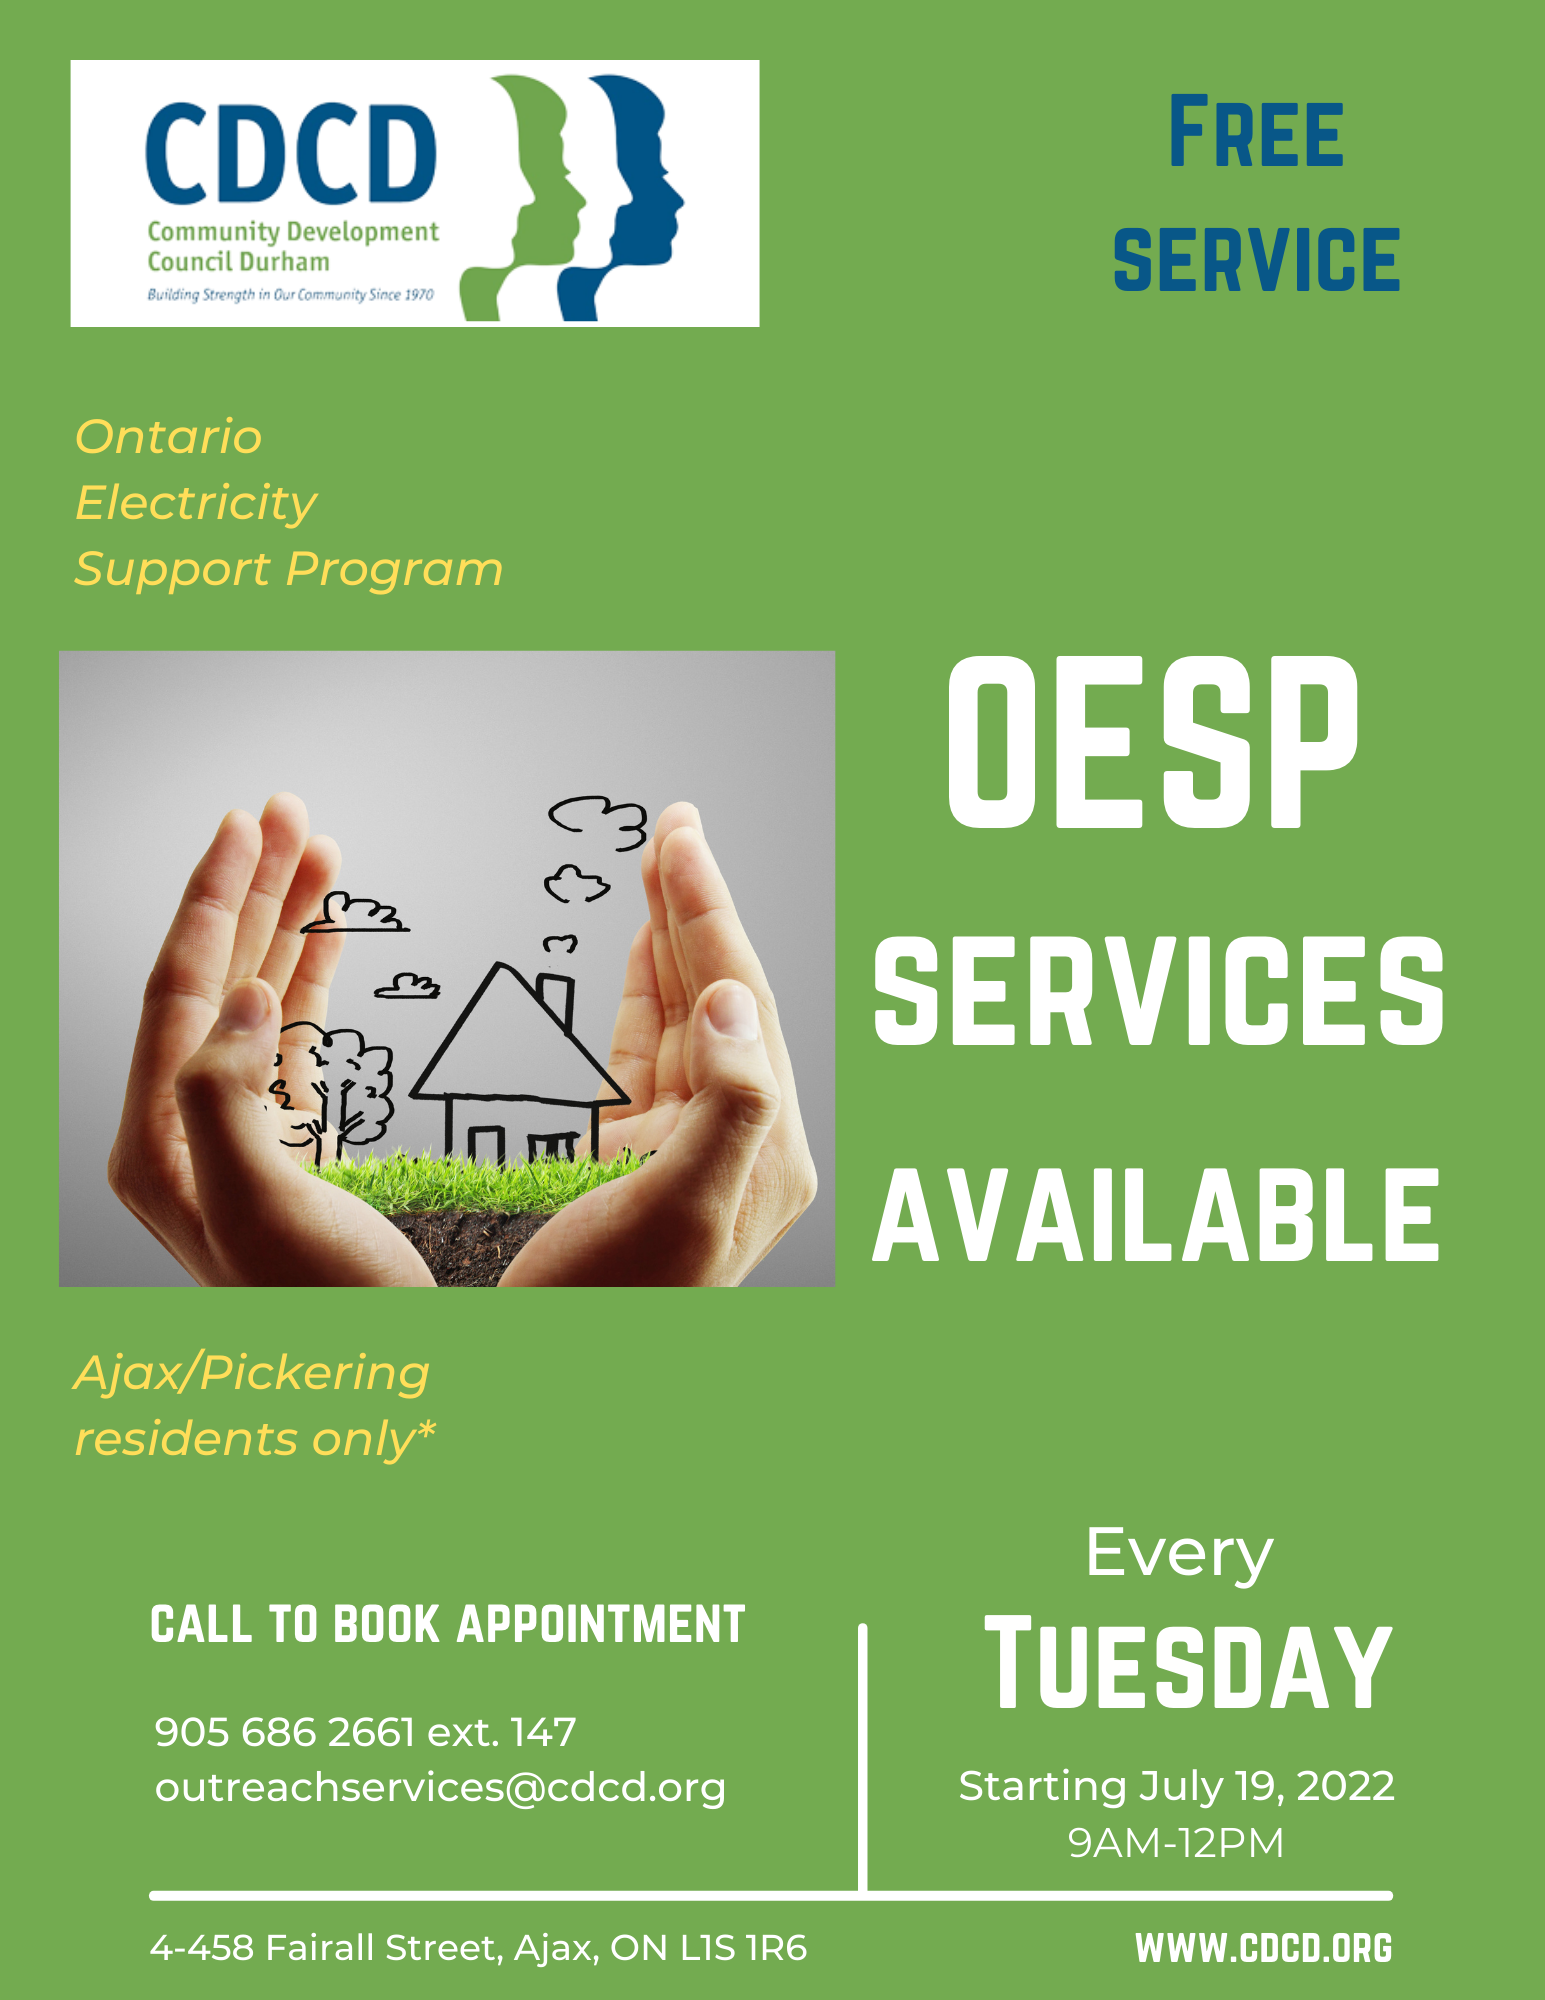 Ontario Electricity Support Program OESP Services CDCD